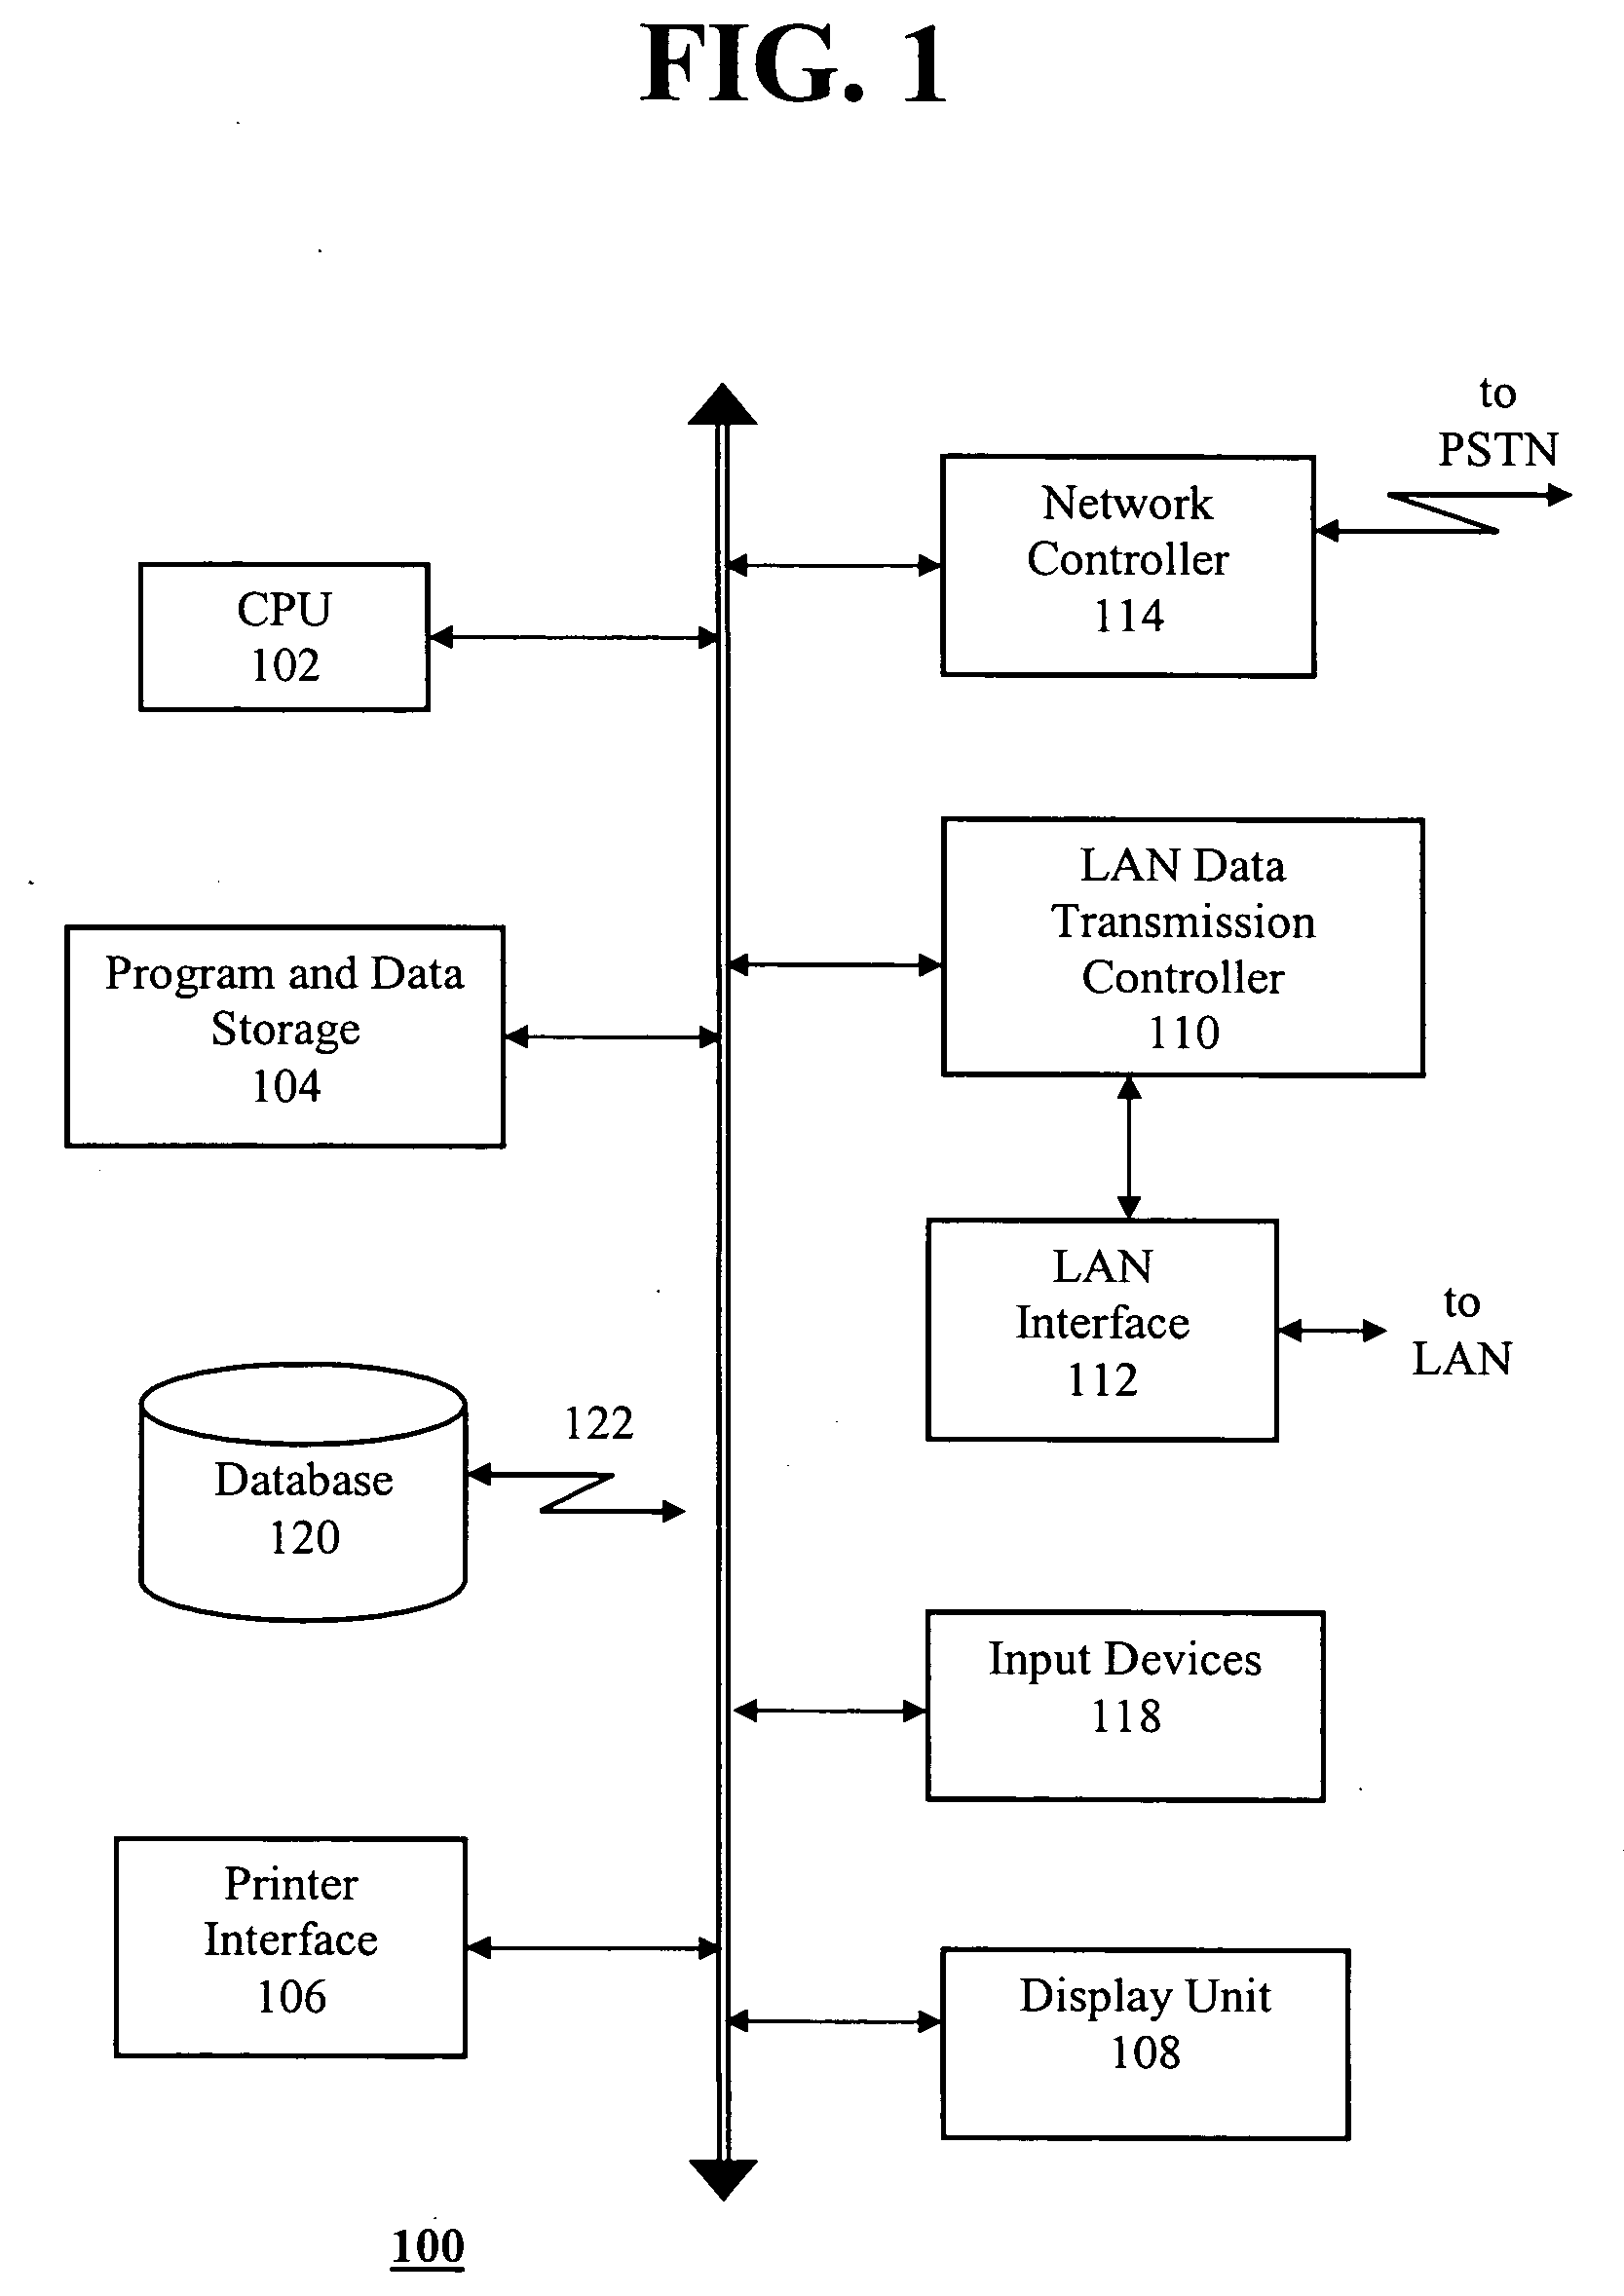 Method and apparatus for transforming legacy software applications into modern object-oriented distributed systems